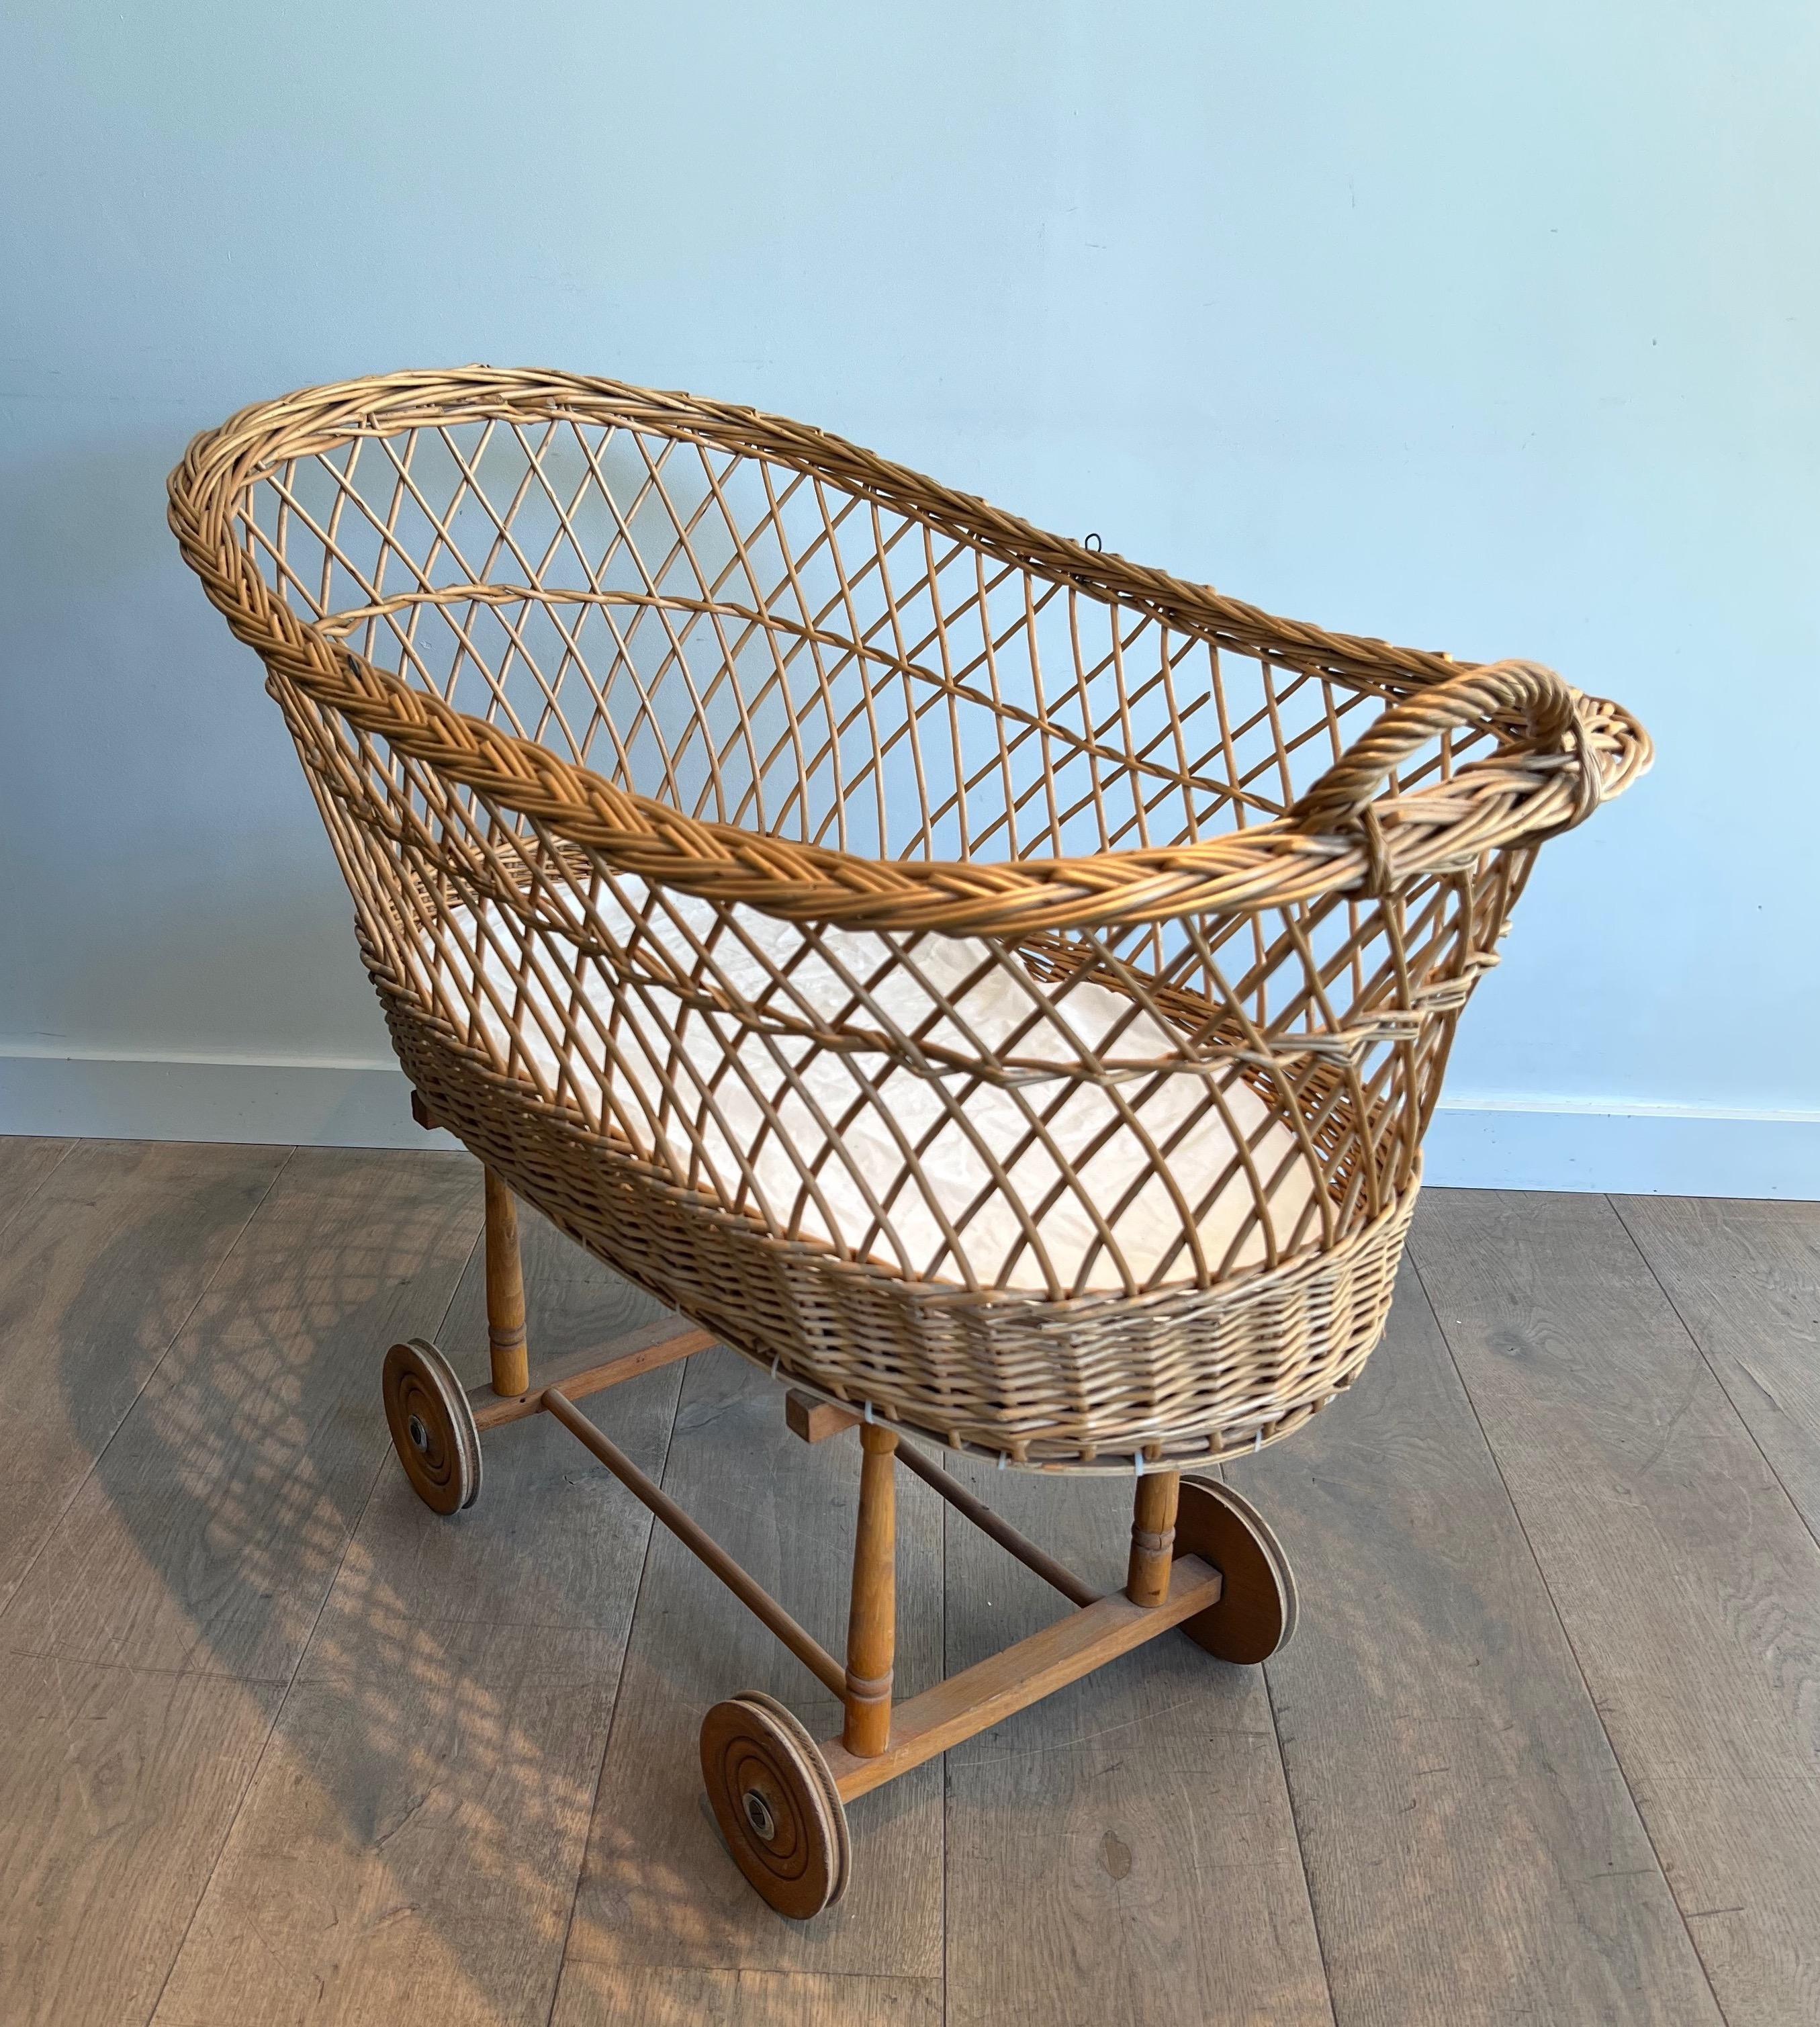 This very nice and uniquel cradle is made of a fine rattan work placed on a wooden base with casters. This is a French work. Circa 1950